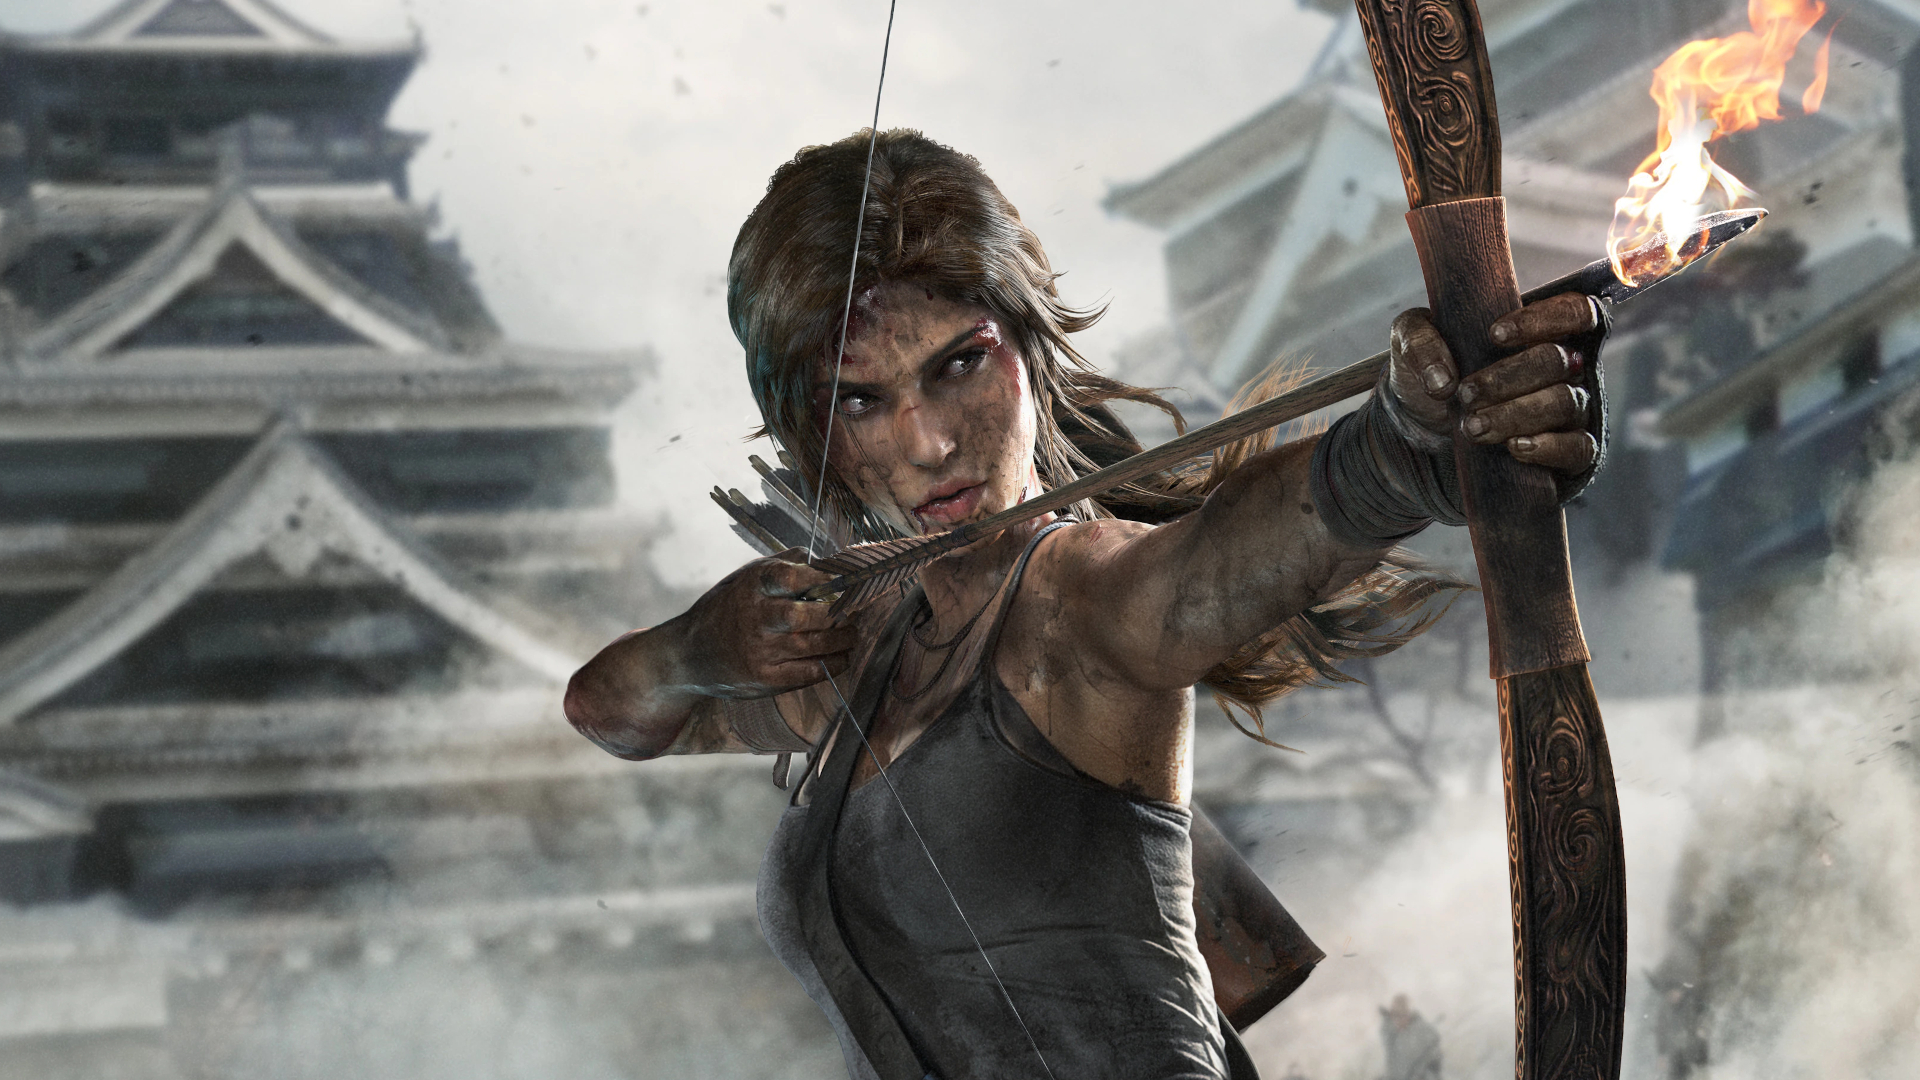 Square Enix Sells Tomb Raider to Invest More in Blockchain Games - CNET